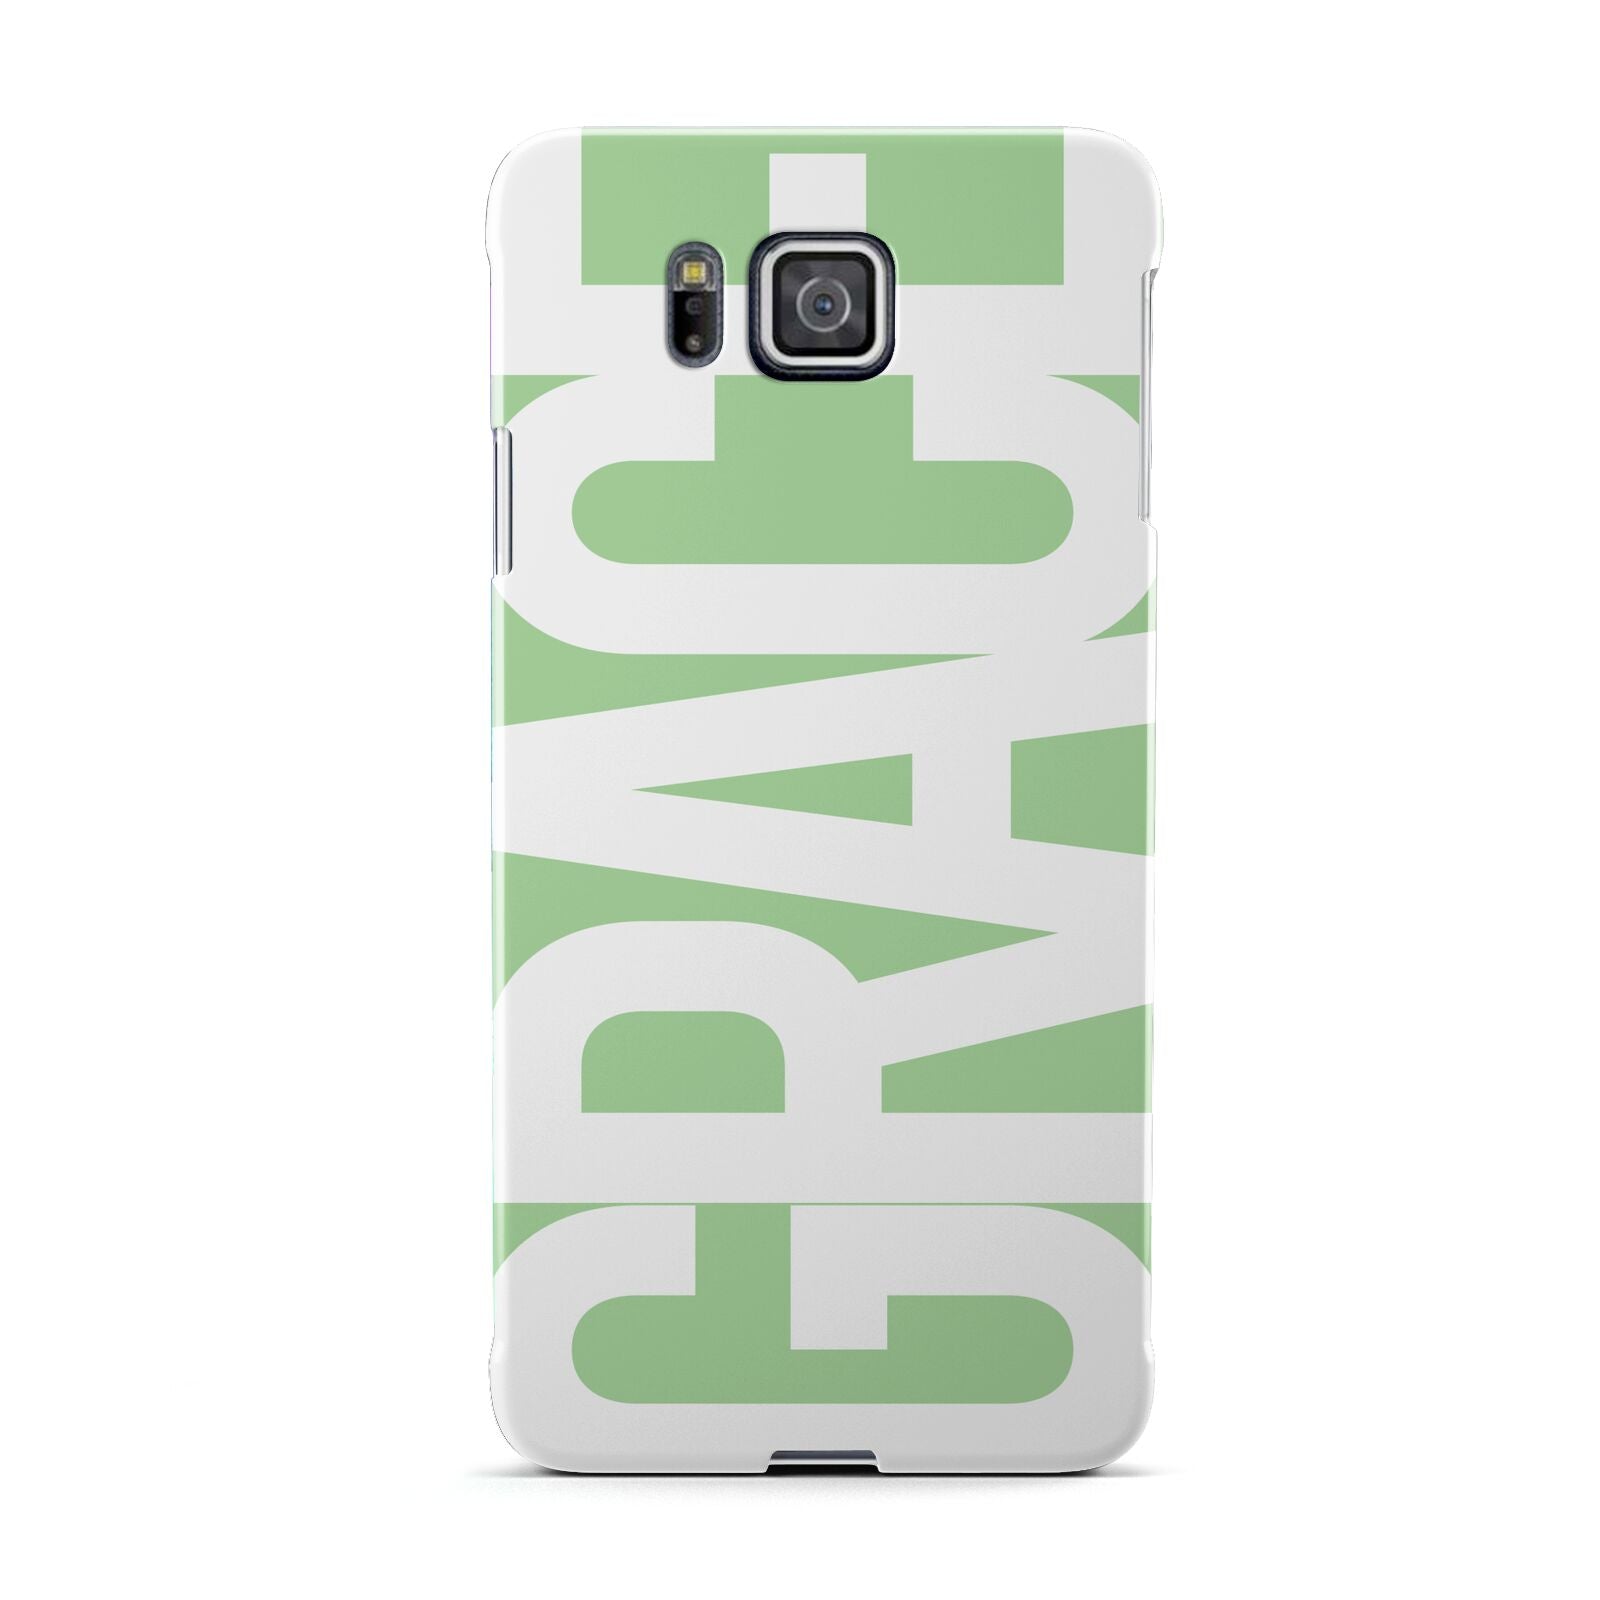 Pale Green with Bold White Text Samsung Galaxy Alpha Case